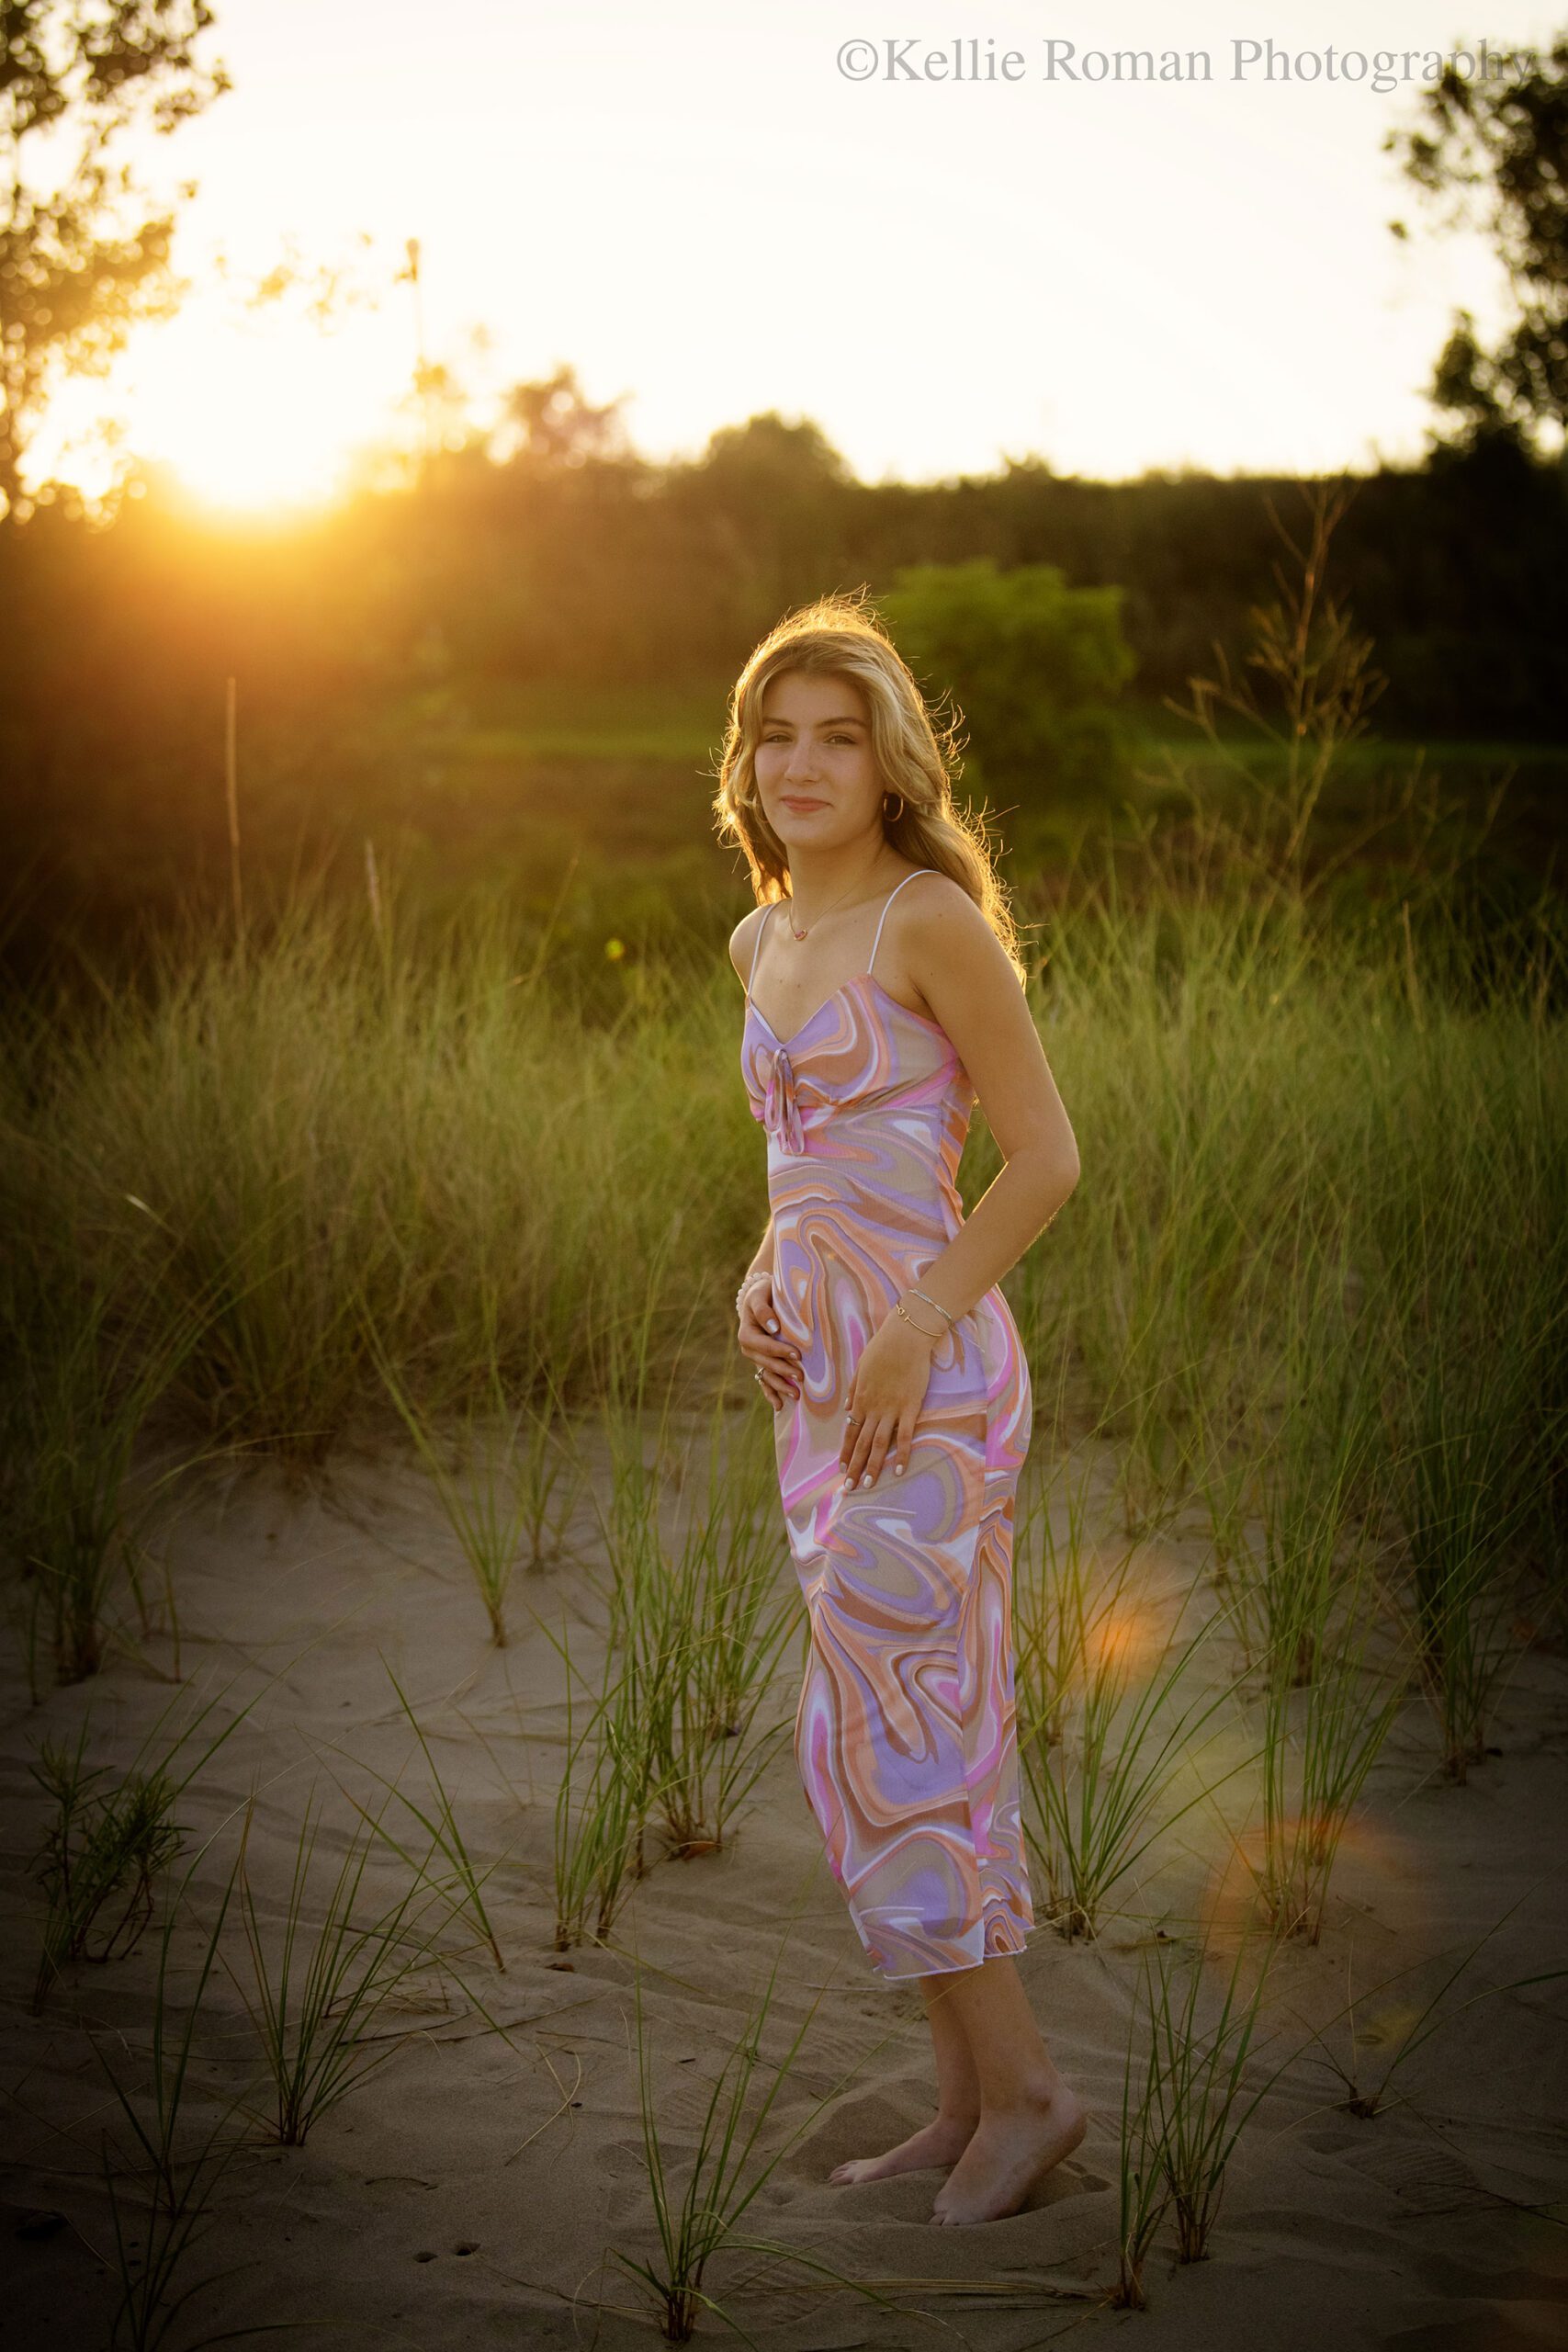 high school senior photographer. racine high school girl is standing with pink and purple dress on in the sand on the beach. the sun is setting behind her and it's glowing gold. her hair and beach grass is lite up from the sun.